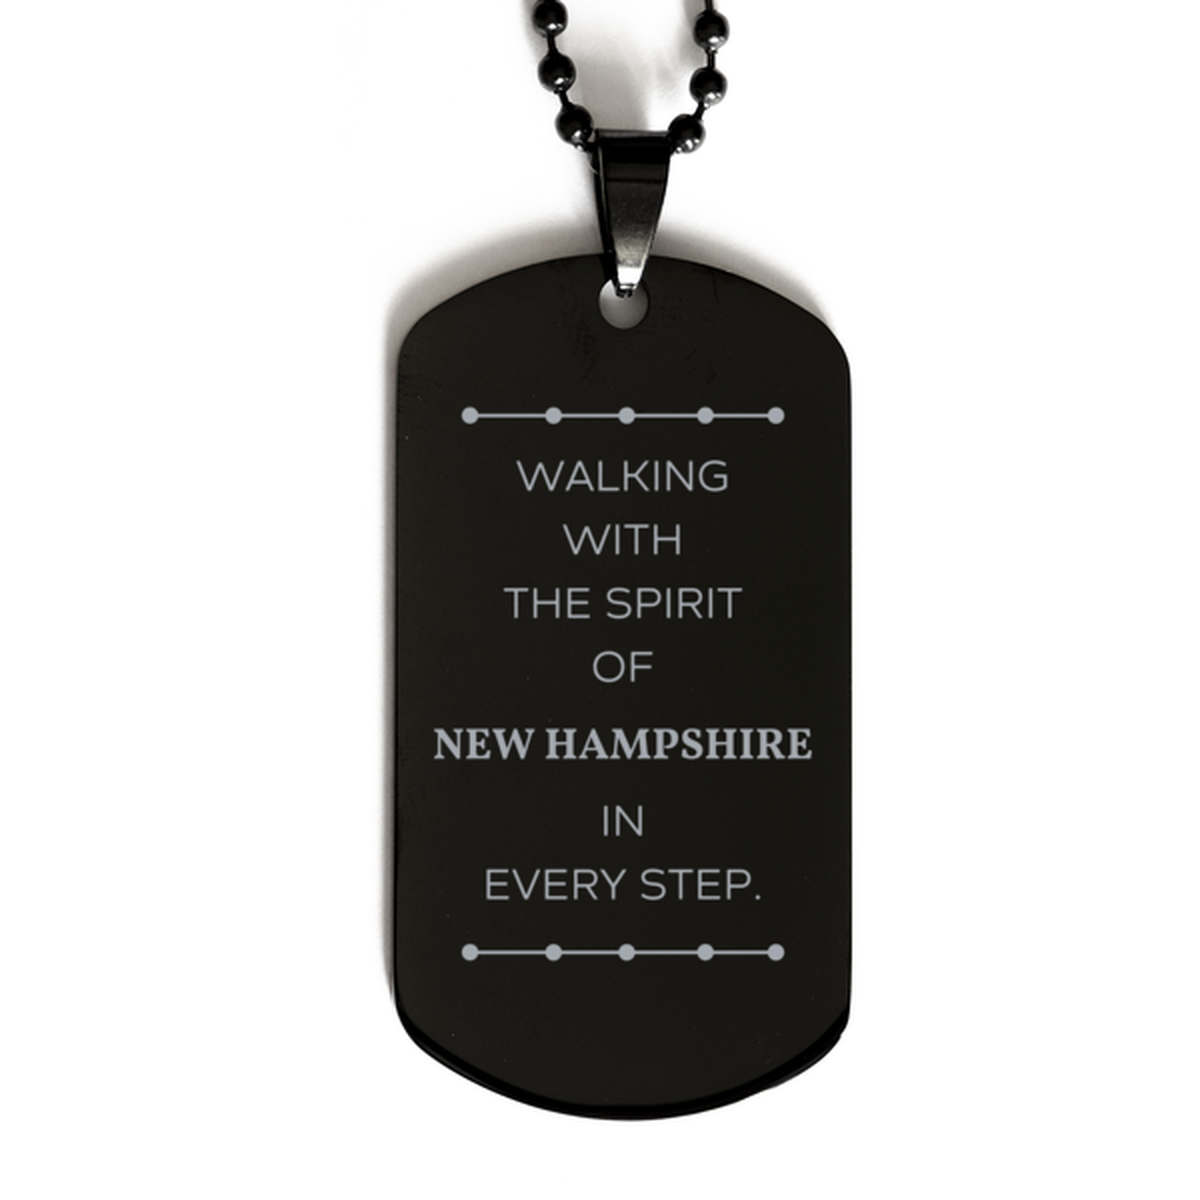 New Hampshire Gifts, Walking with the spirit, Love New Hampshire Birthday Christmas Black Dog Tag For New Hampshire People, Men, Women, Friends